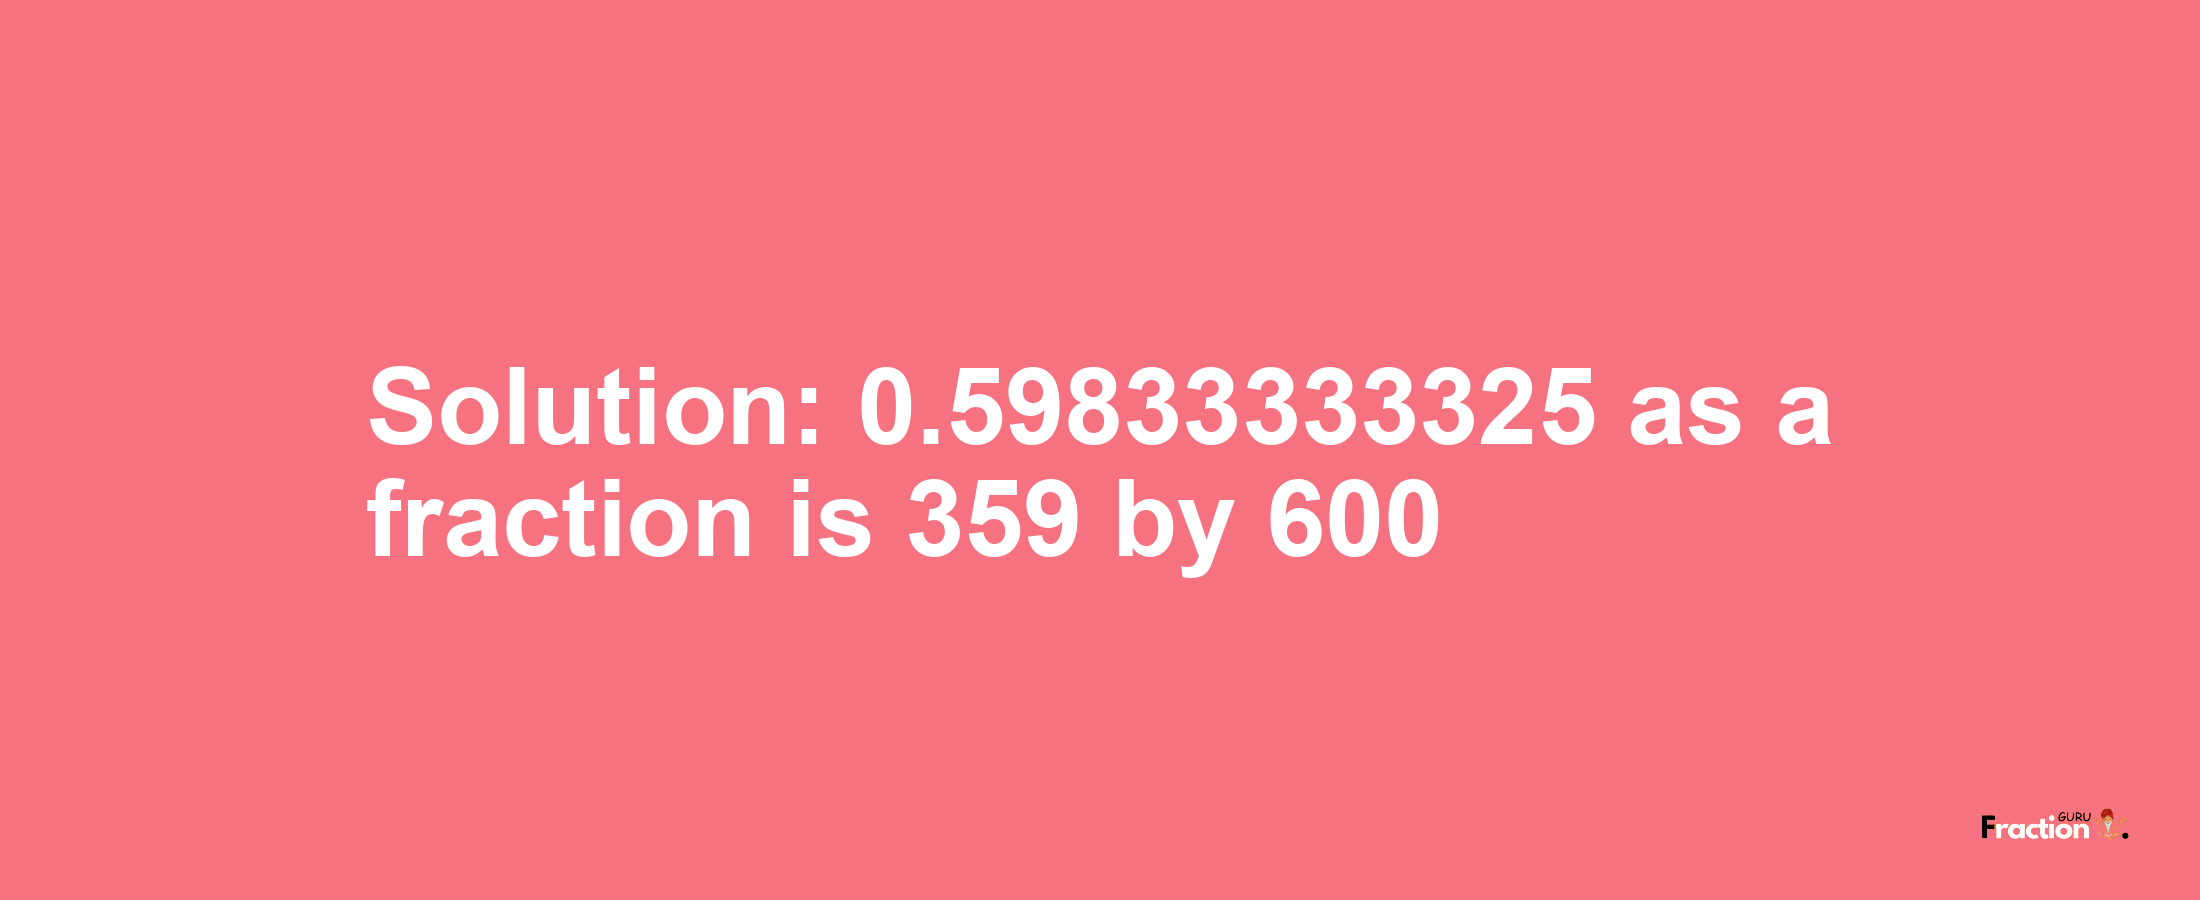 Solution:0.59833333325 as a fraction is 359/600